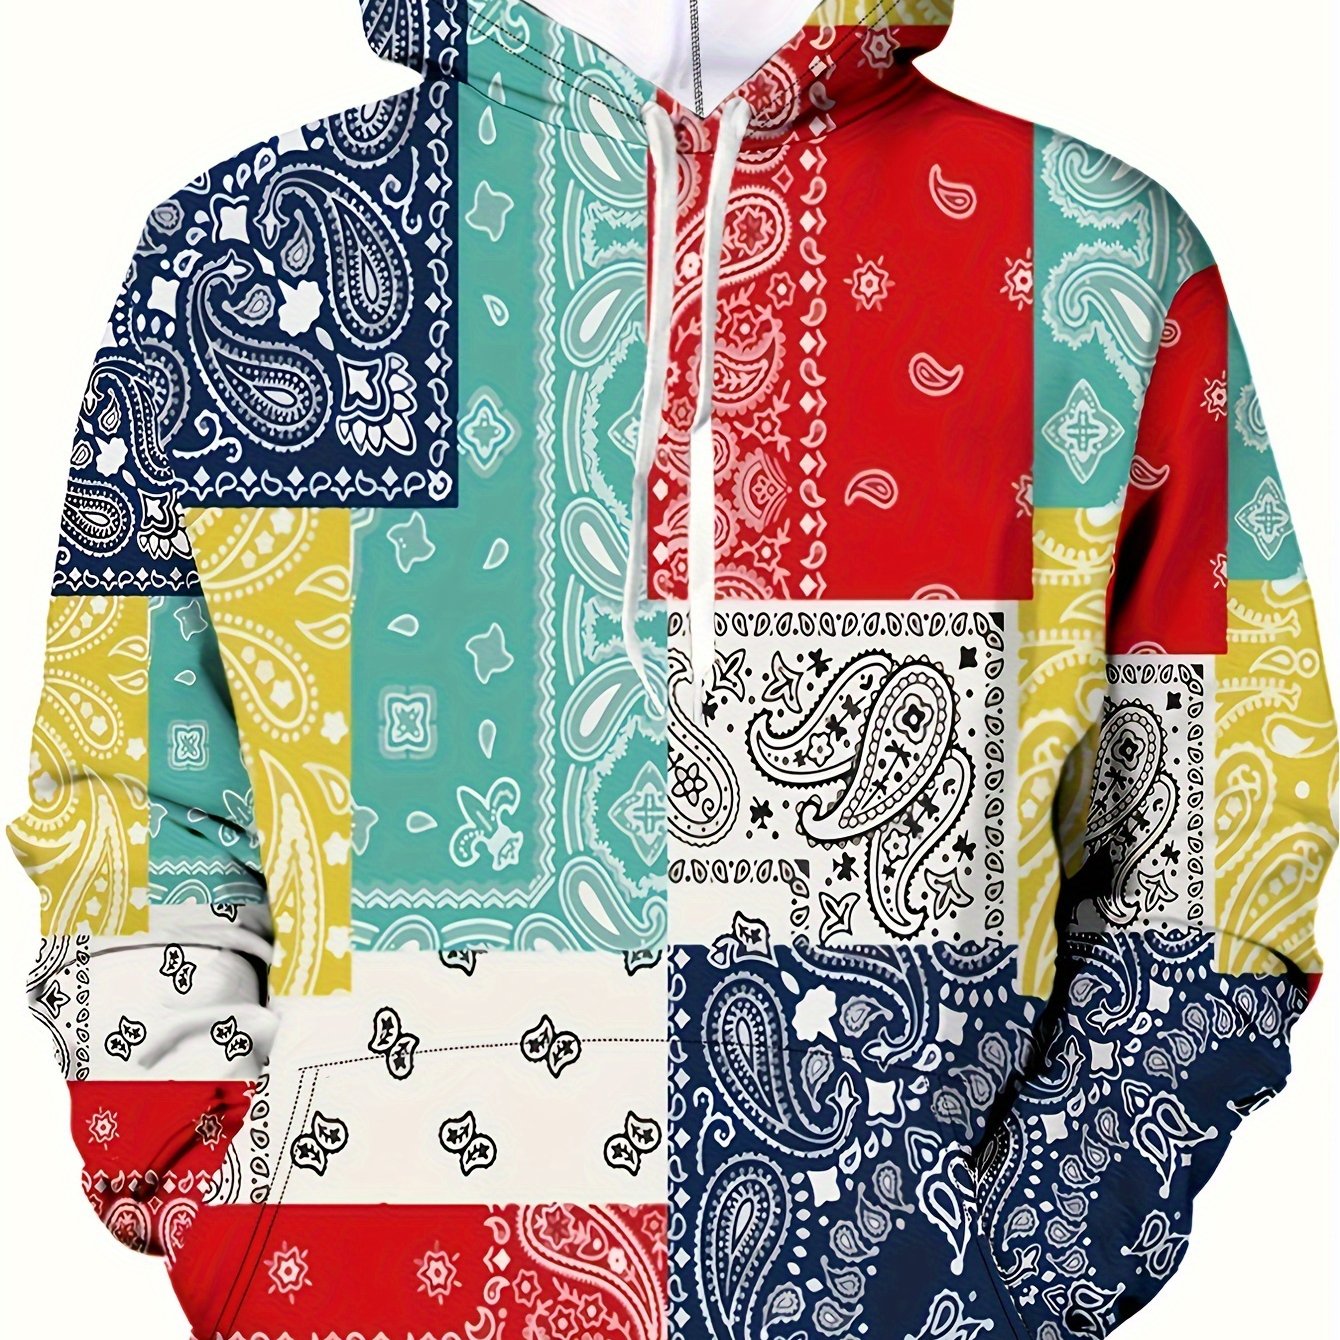 Retro Bandana Print Hoodie, Cool Hoodies For Men, Men's Casual Graphic Design Pullover Hooded Sweatshirt With Kangaroo Pocket Streetwear For Winter Fall, As Gifts